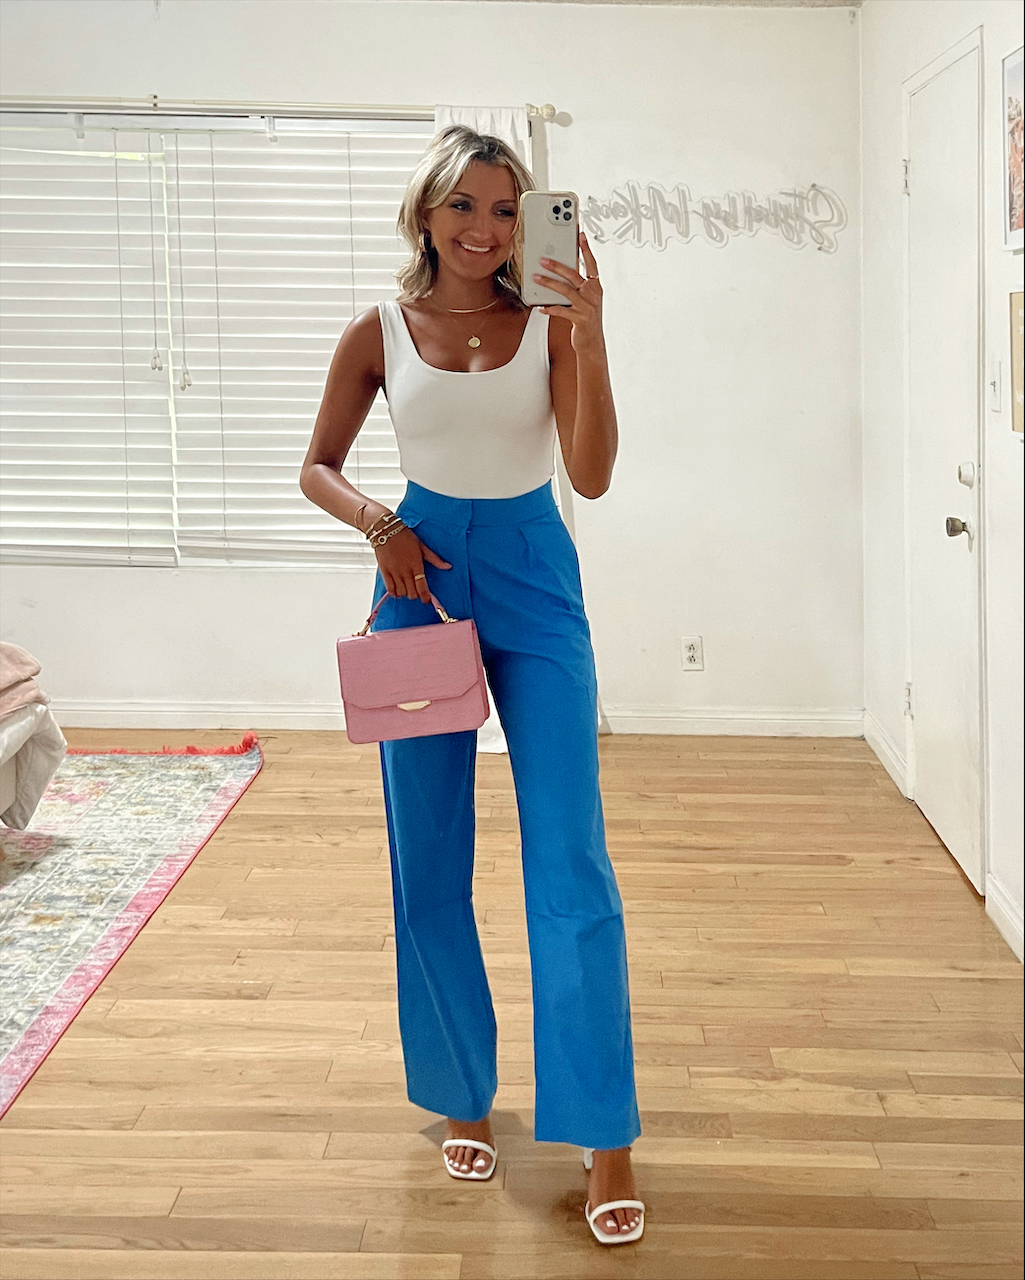 10 sorority recruitment outfit ideas: open house round 2022